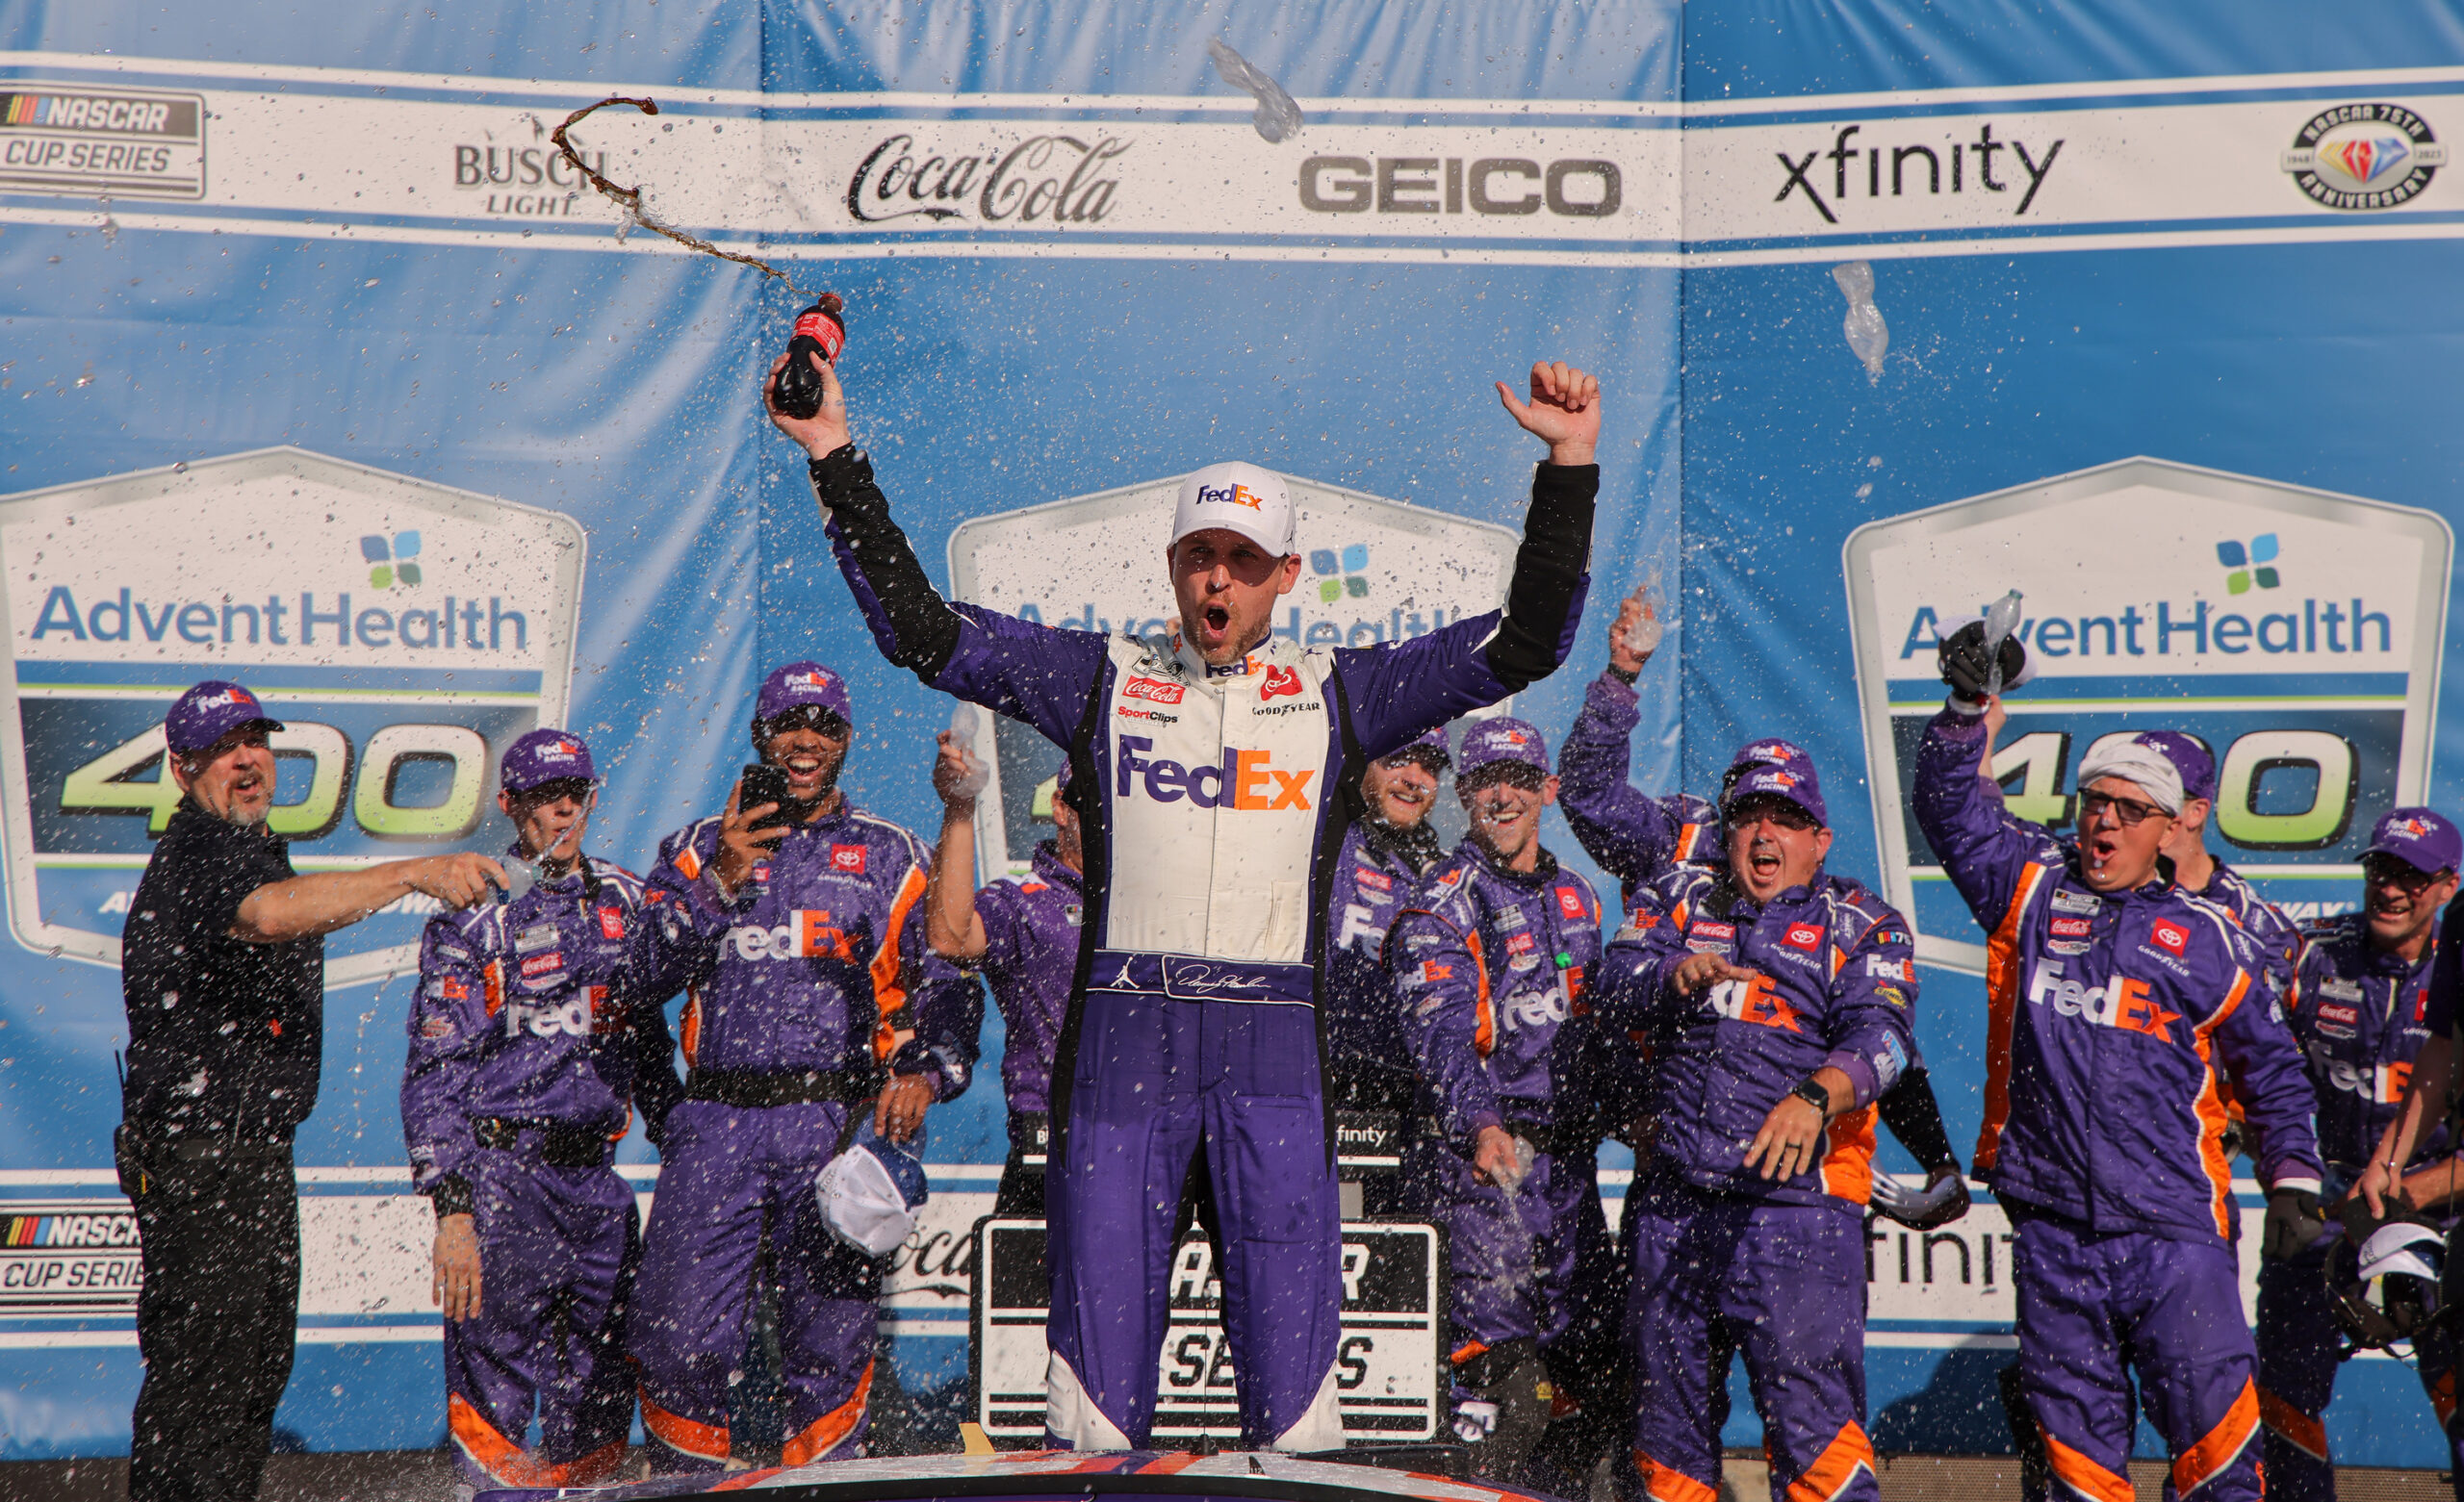 Denny Hamlin, driver of the #11 FedEx Express Toyota, celebrates in victory lane after winning the NASCAR Cup Series Advent Health 400 at Kansas Speedway on May 07, 2023 in Kansas City, Kansas.